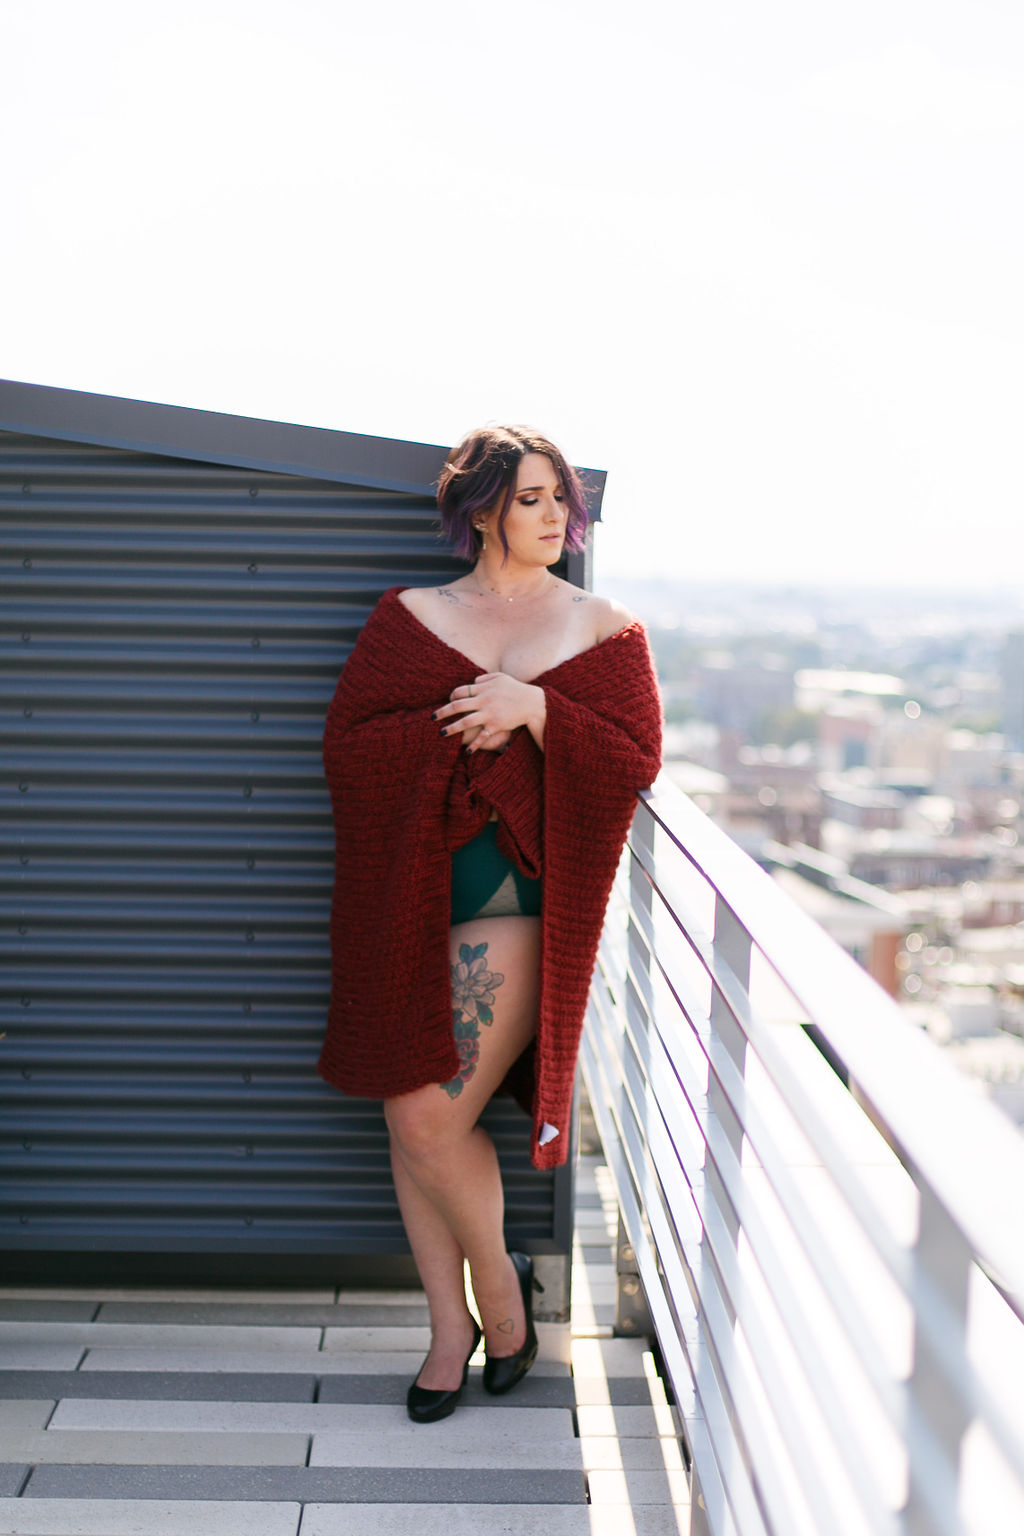 Philly Outdoor Rooftop Boudoir Session by Swiger Photography 43.jpg